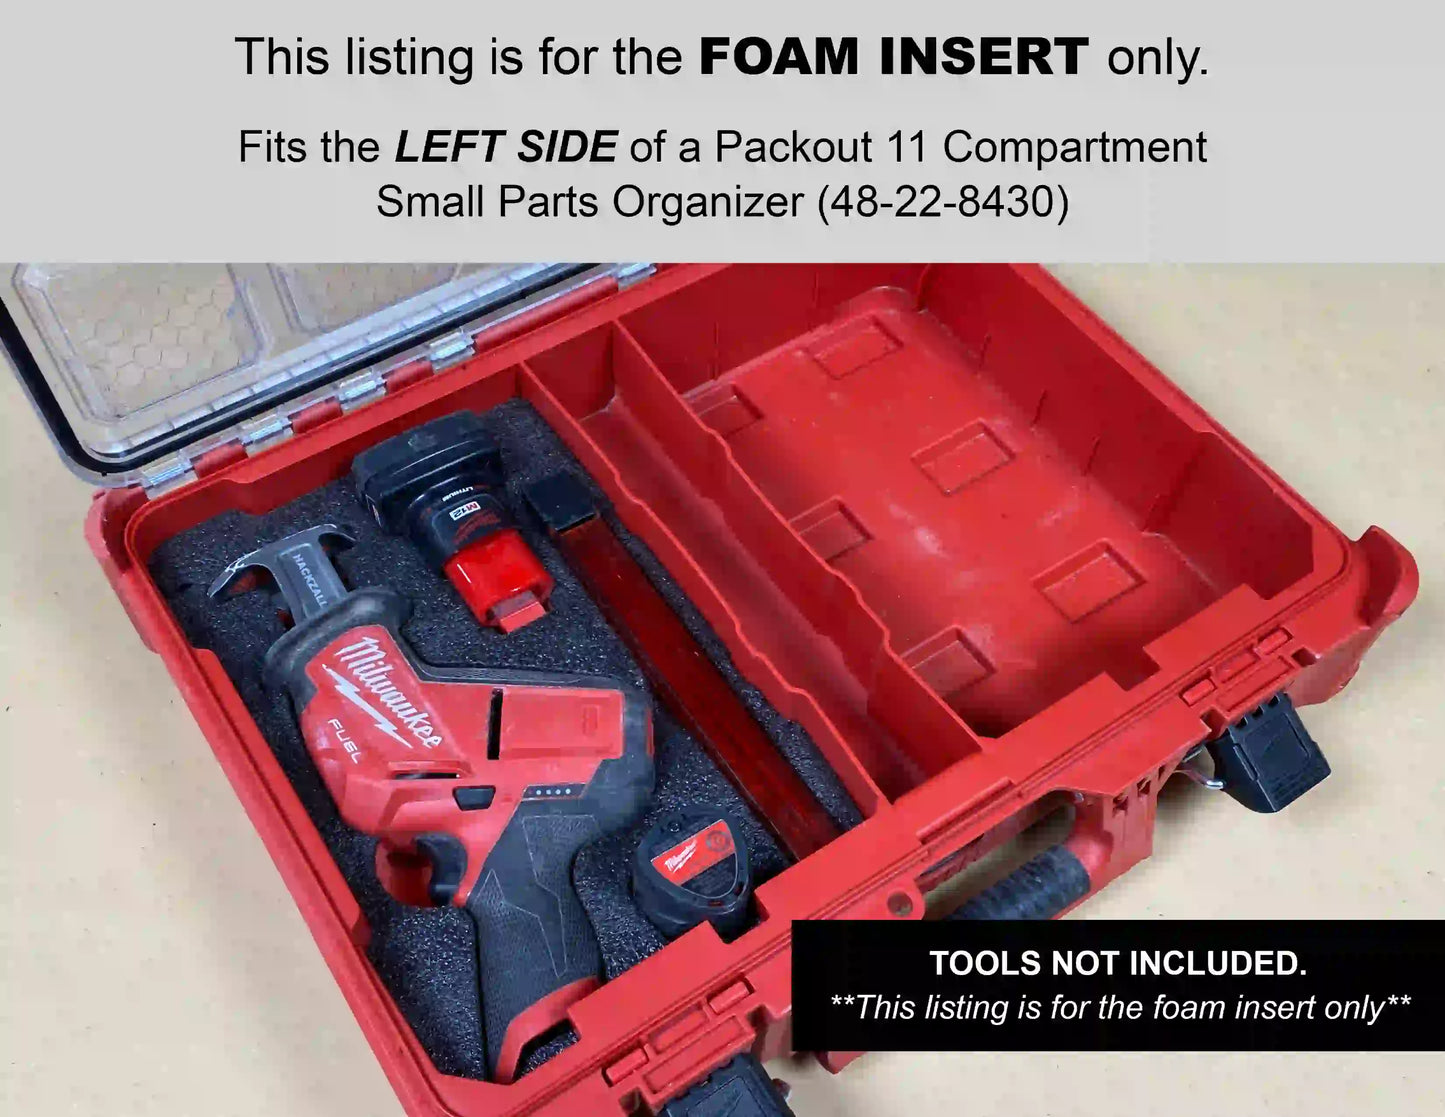 FOAM INSERT to store M12 Fuel Hackzall 2520-20 in a Milwaukee Packout 11 Compartment Tool Box - Tools NOT Included